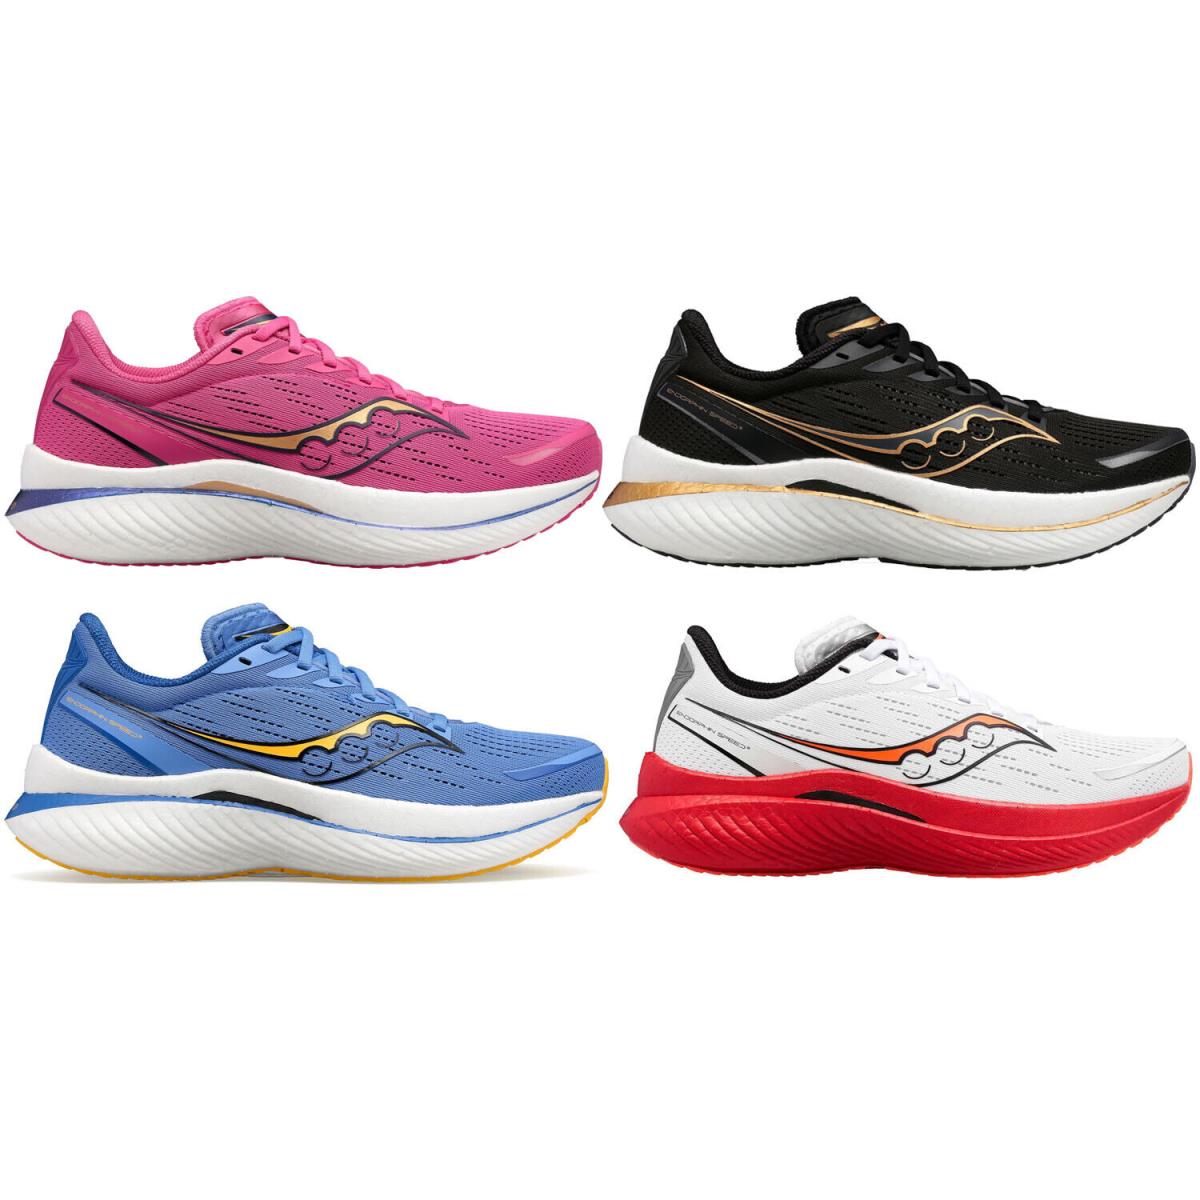 Saucony Endorphin Speed 3 Women`s Performance Running Shoes 6-11 - Multicolor